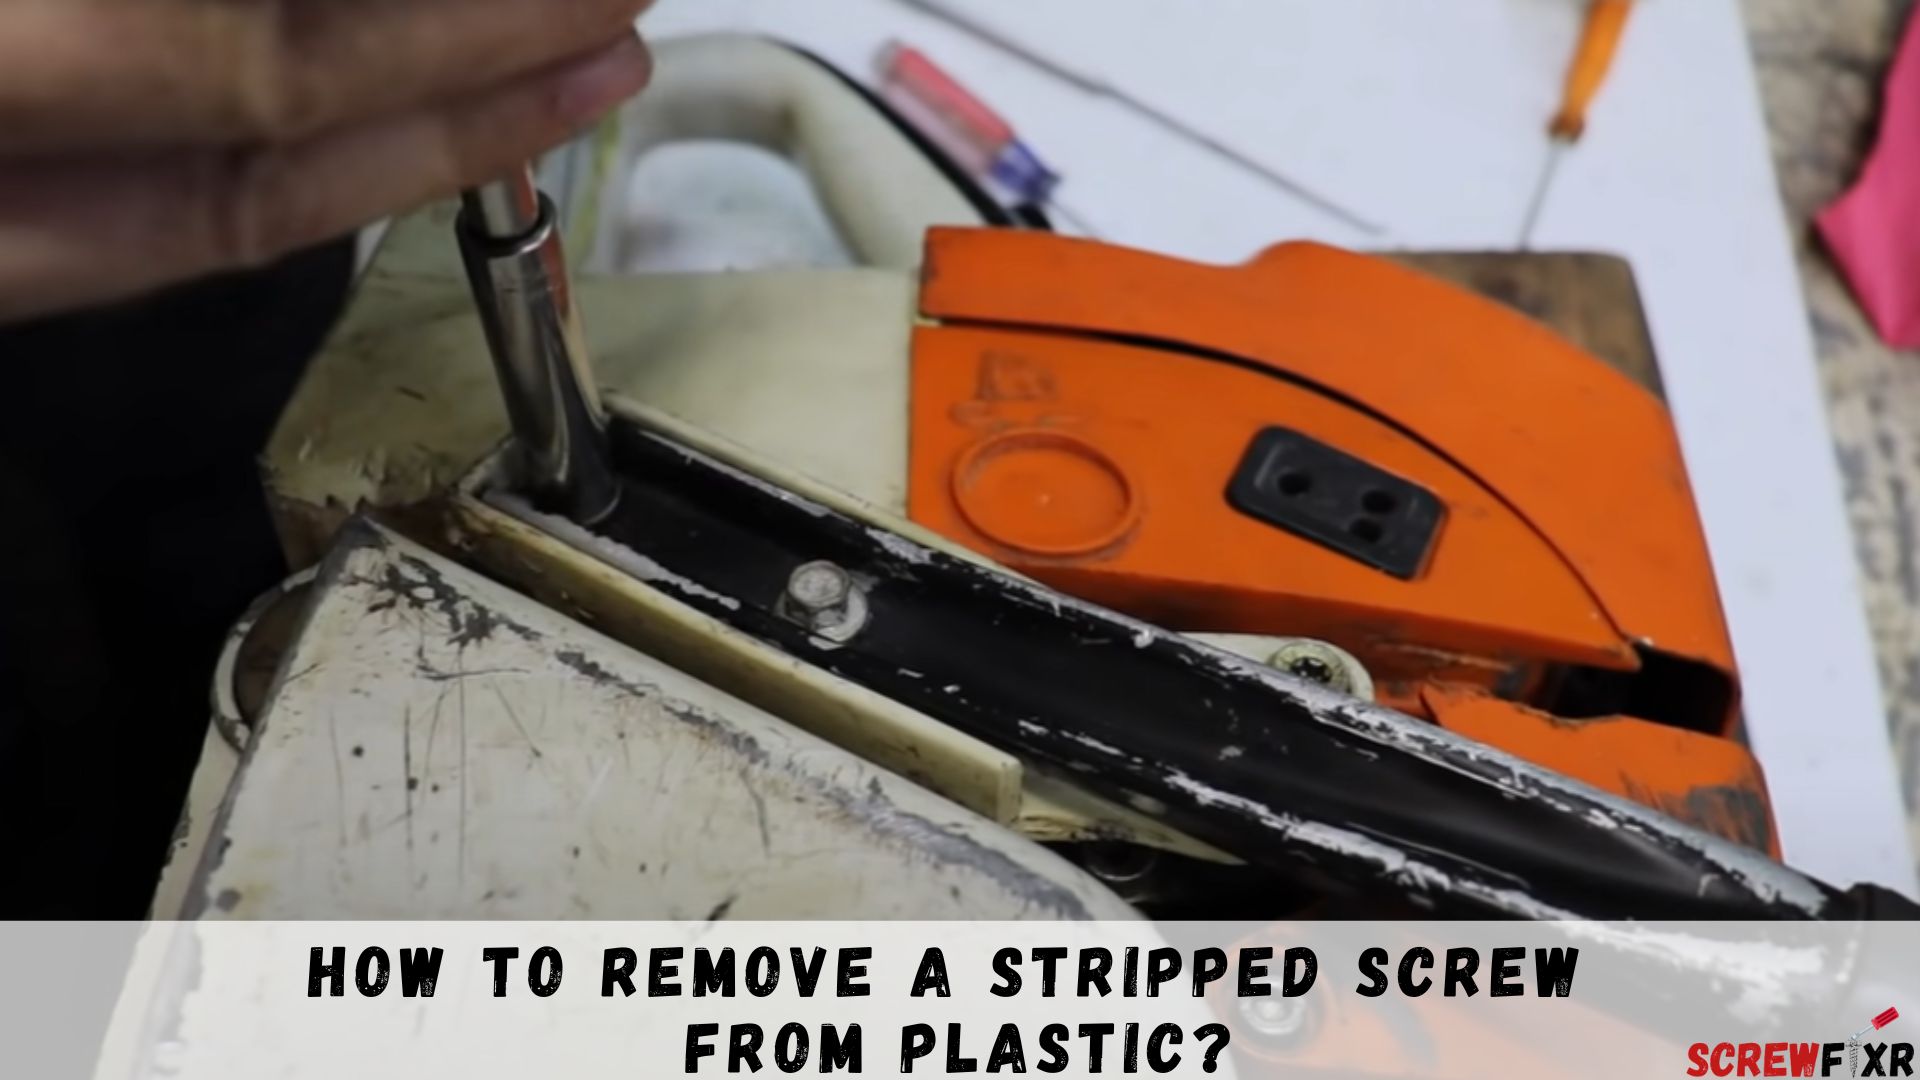 How To Remove A Stripped Screw From Plastic